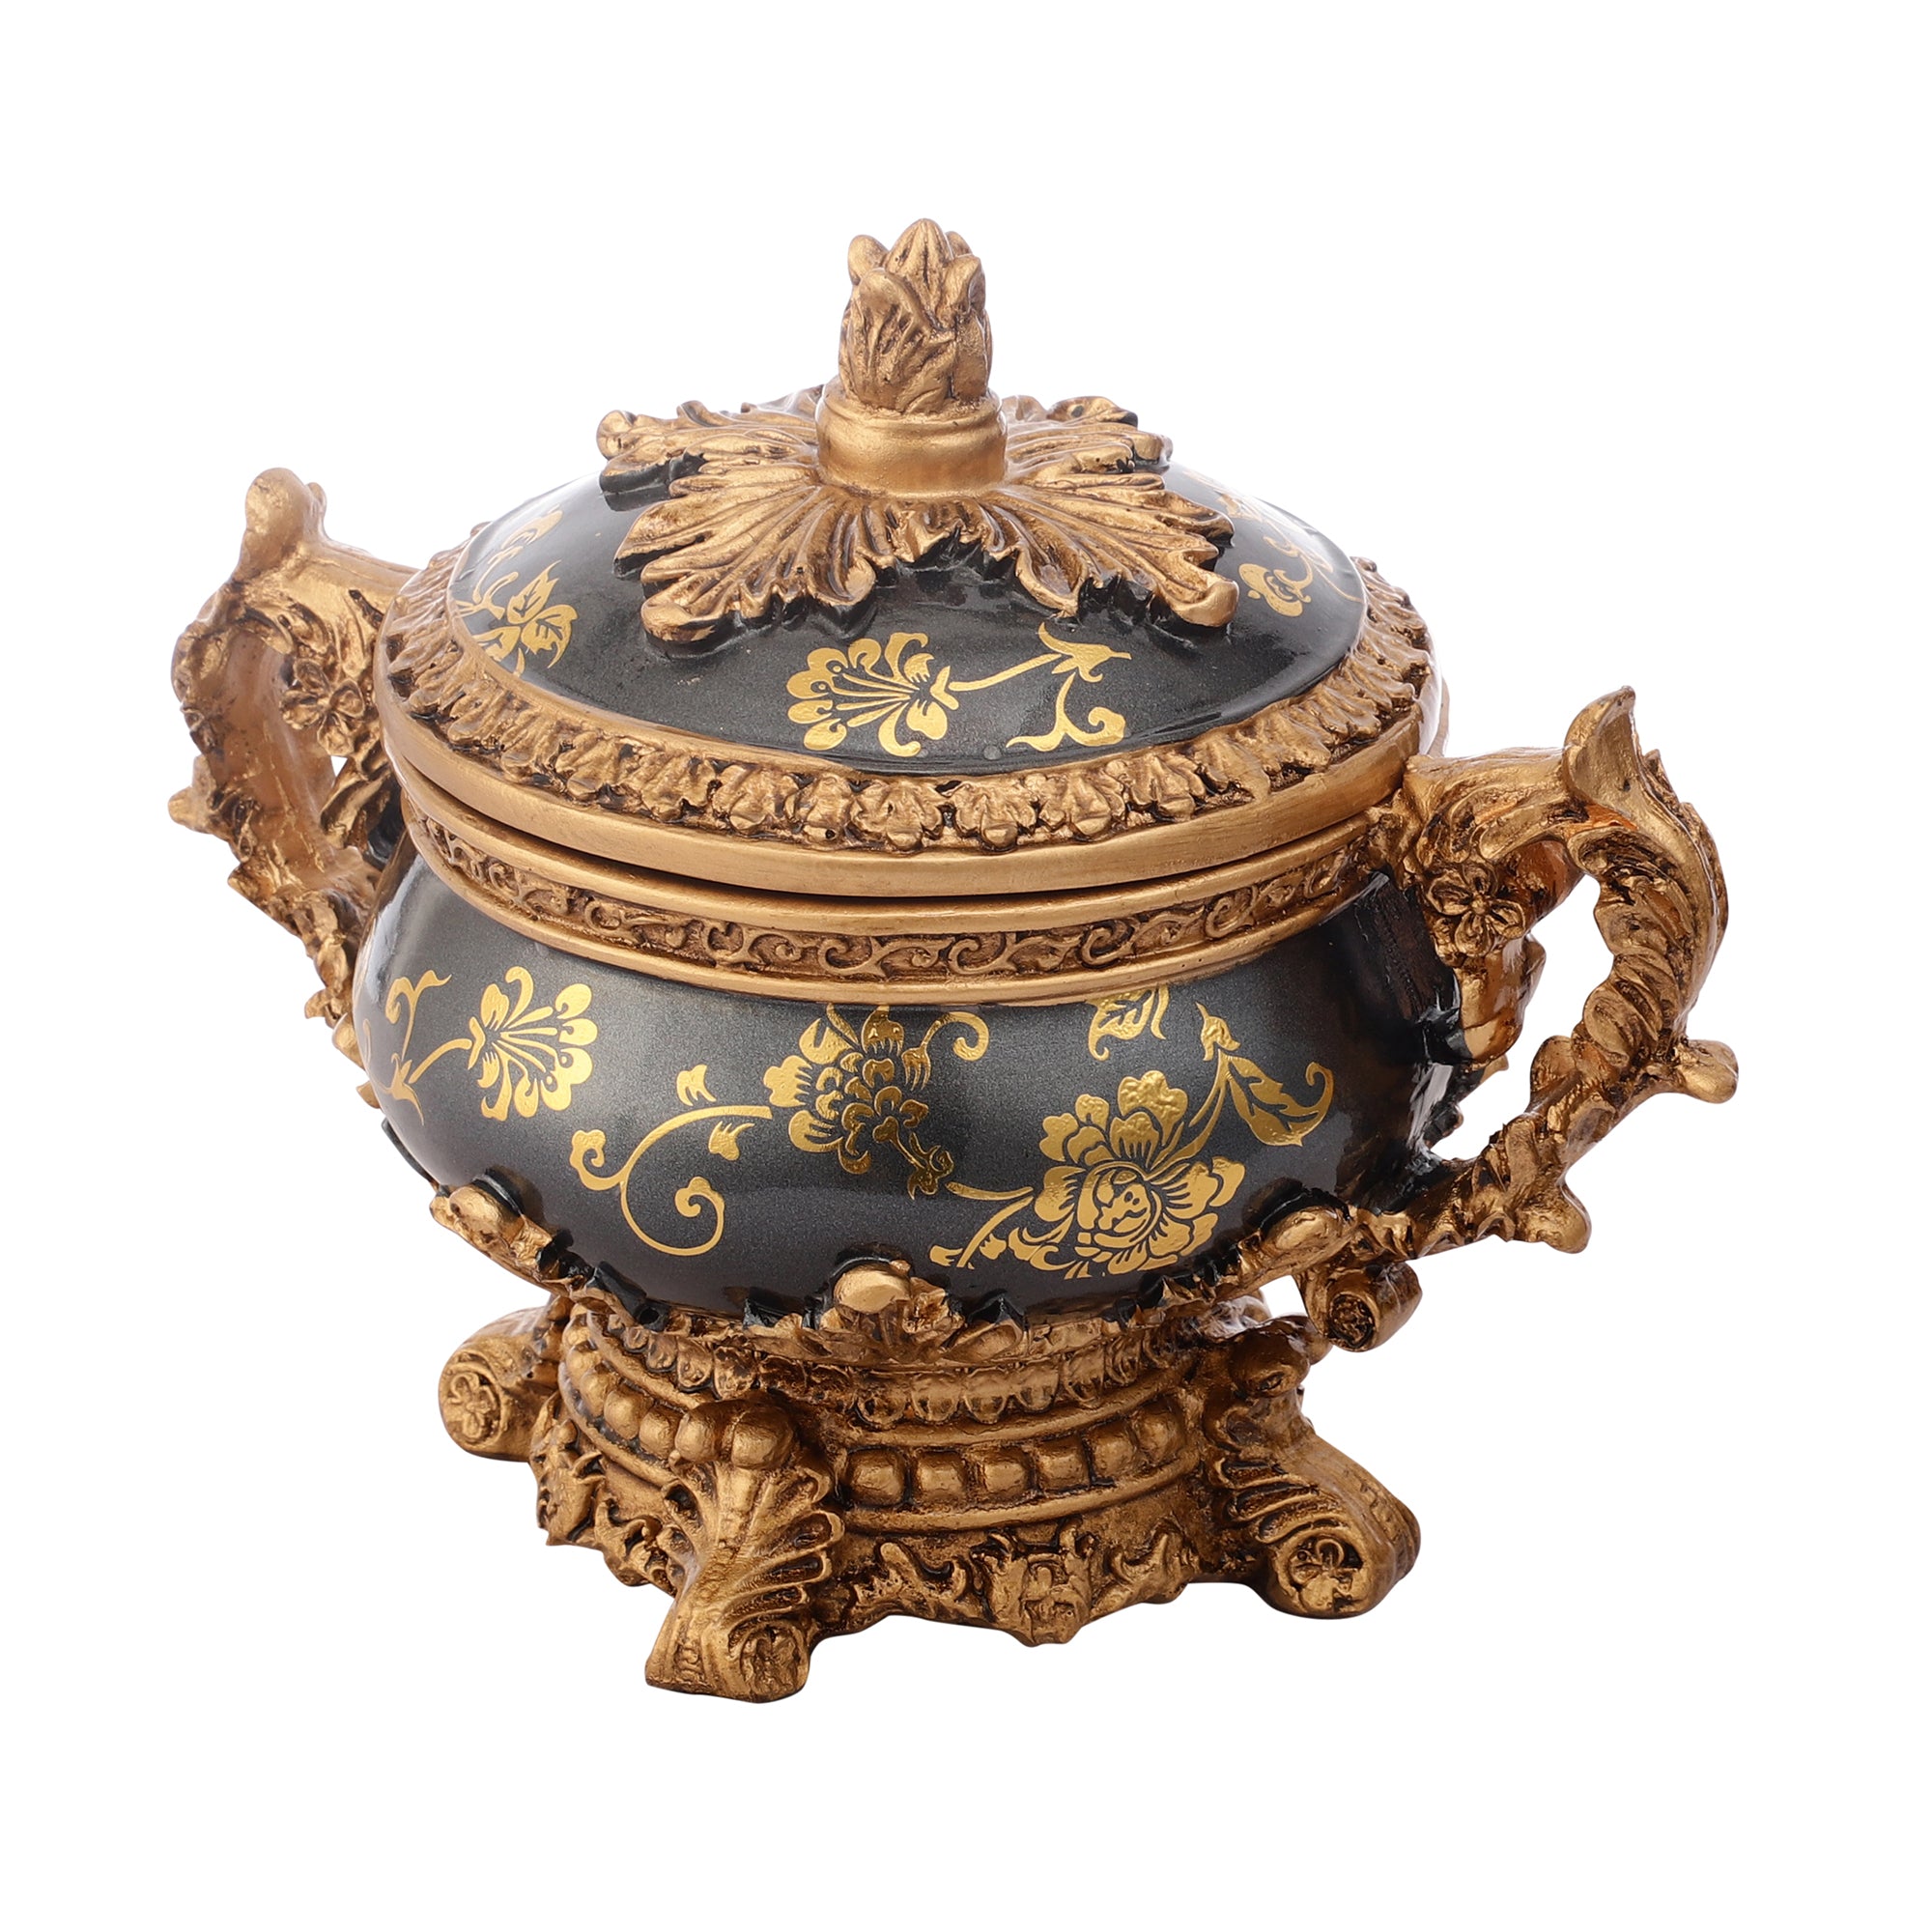 Regalia Gold and Navy Jar with Lid